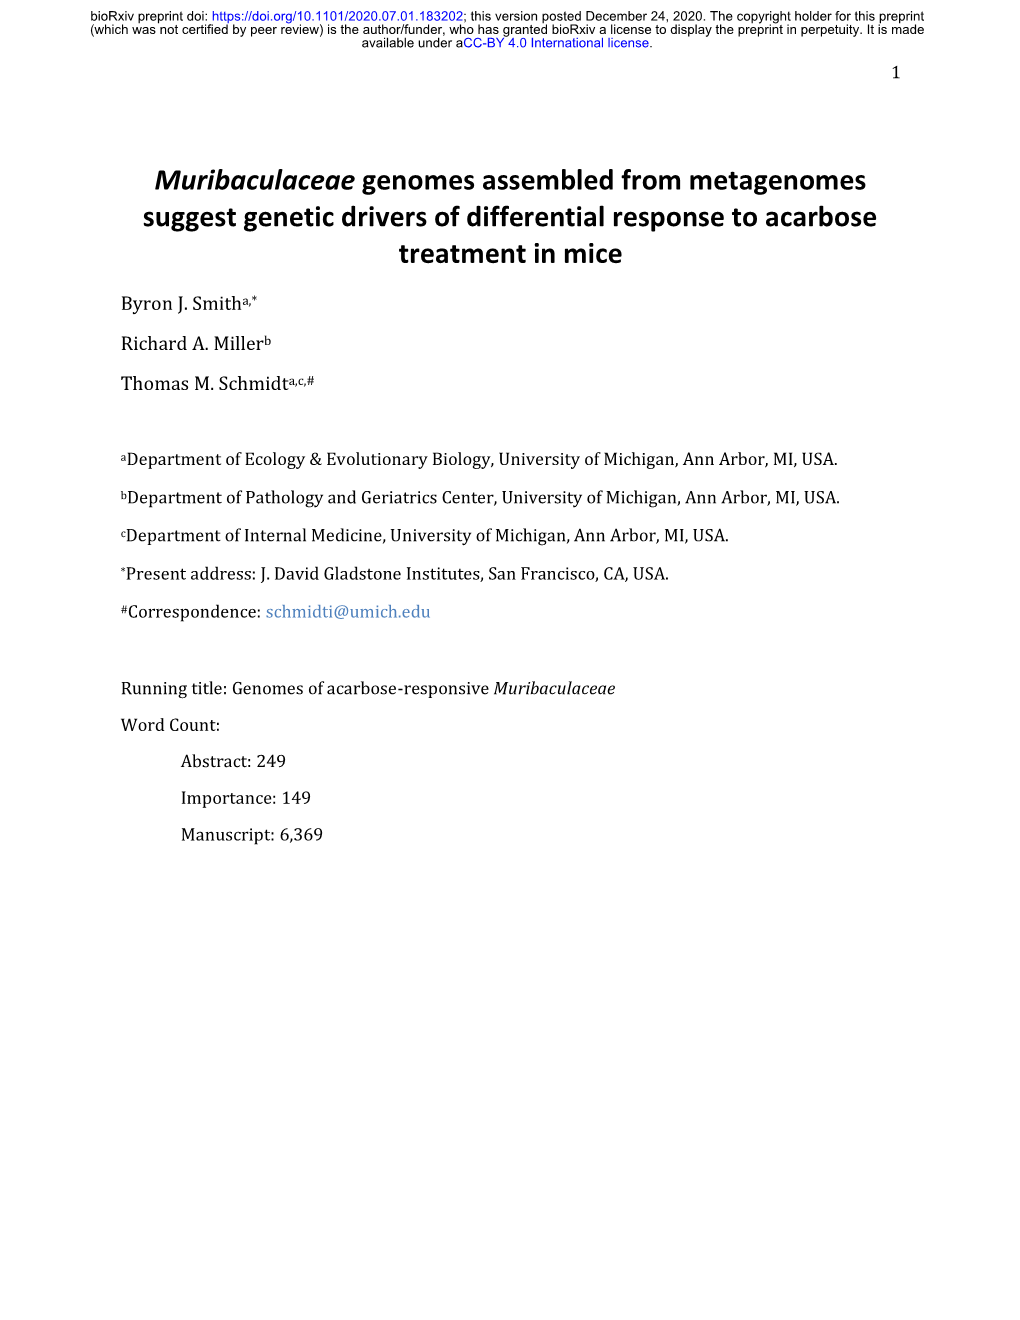 Muribaculaceae Genomes Assembled from Metagenomes Suggest Genetic Drivers of Differential Response to Acarbose Treatment in Mice